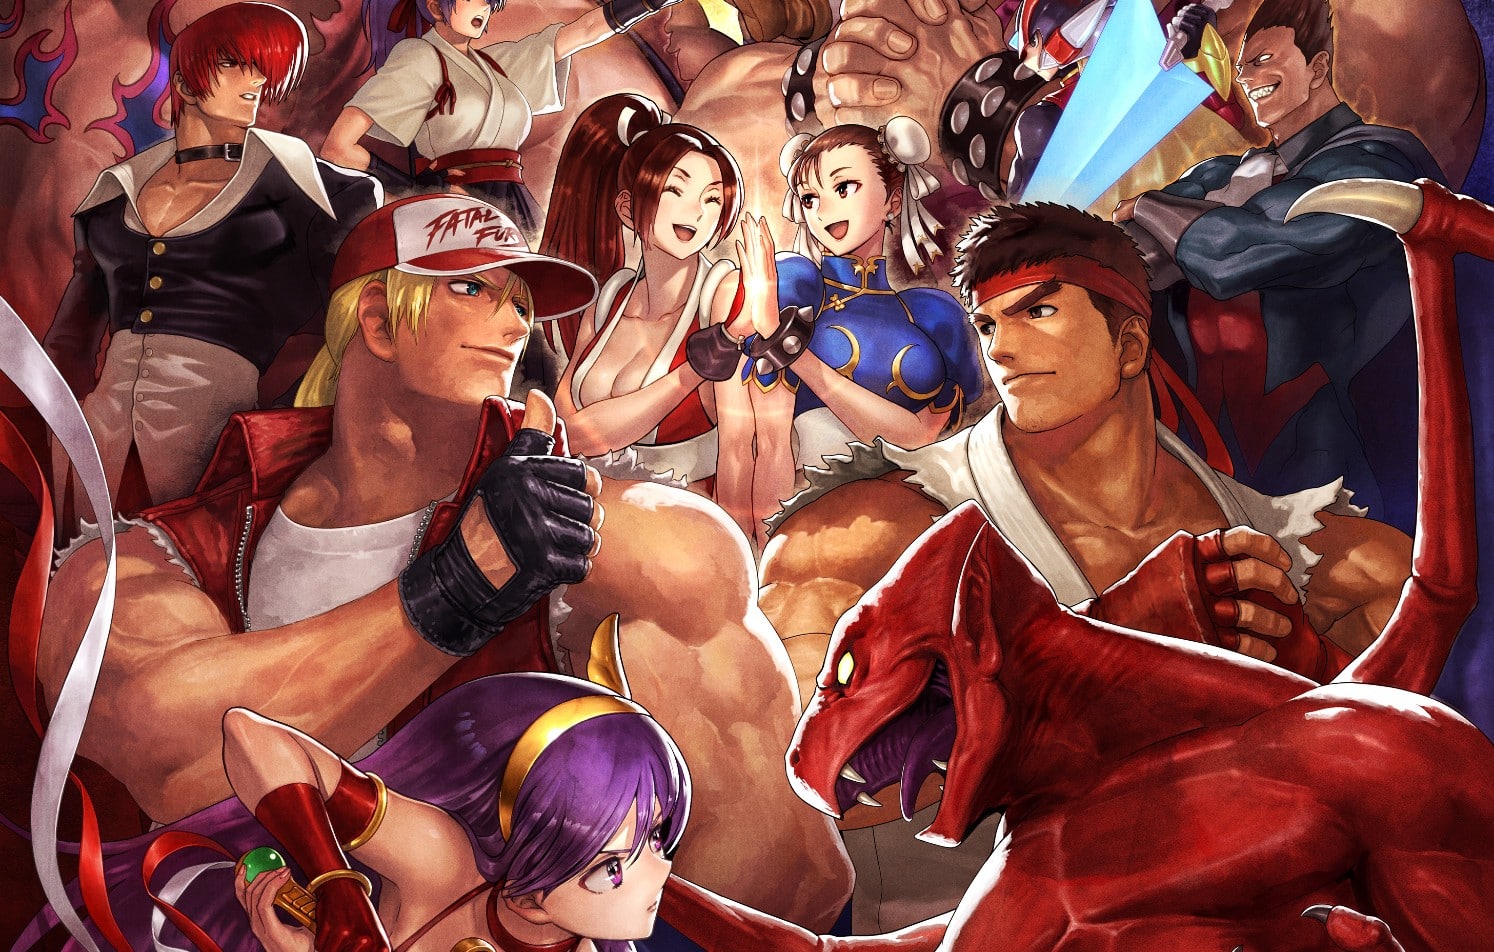 A new version of SNK VS CAPCOM has been announced and will be arriving soon.